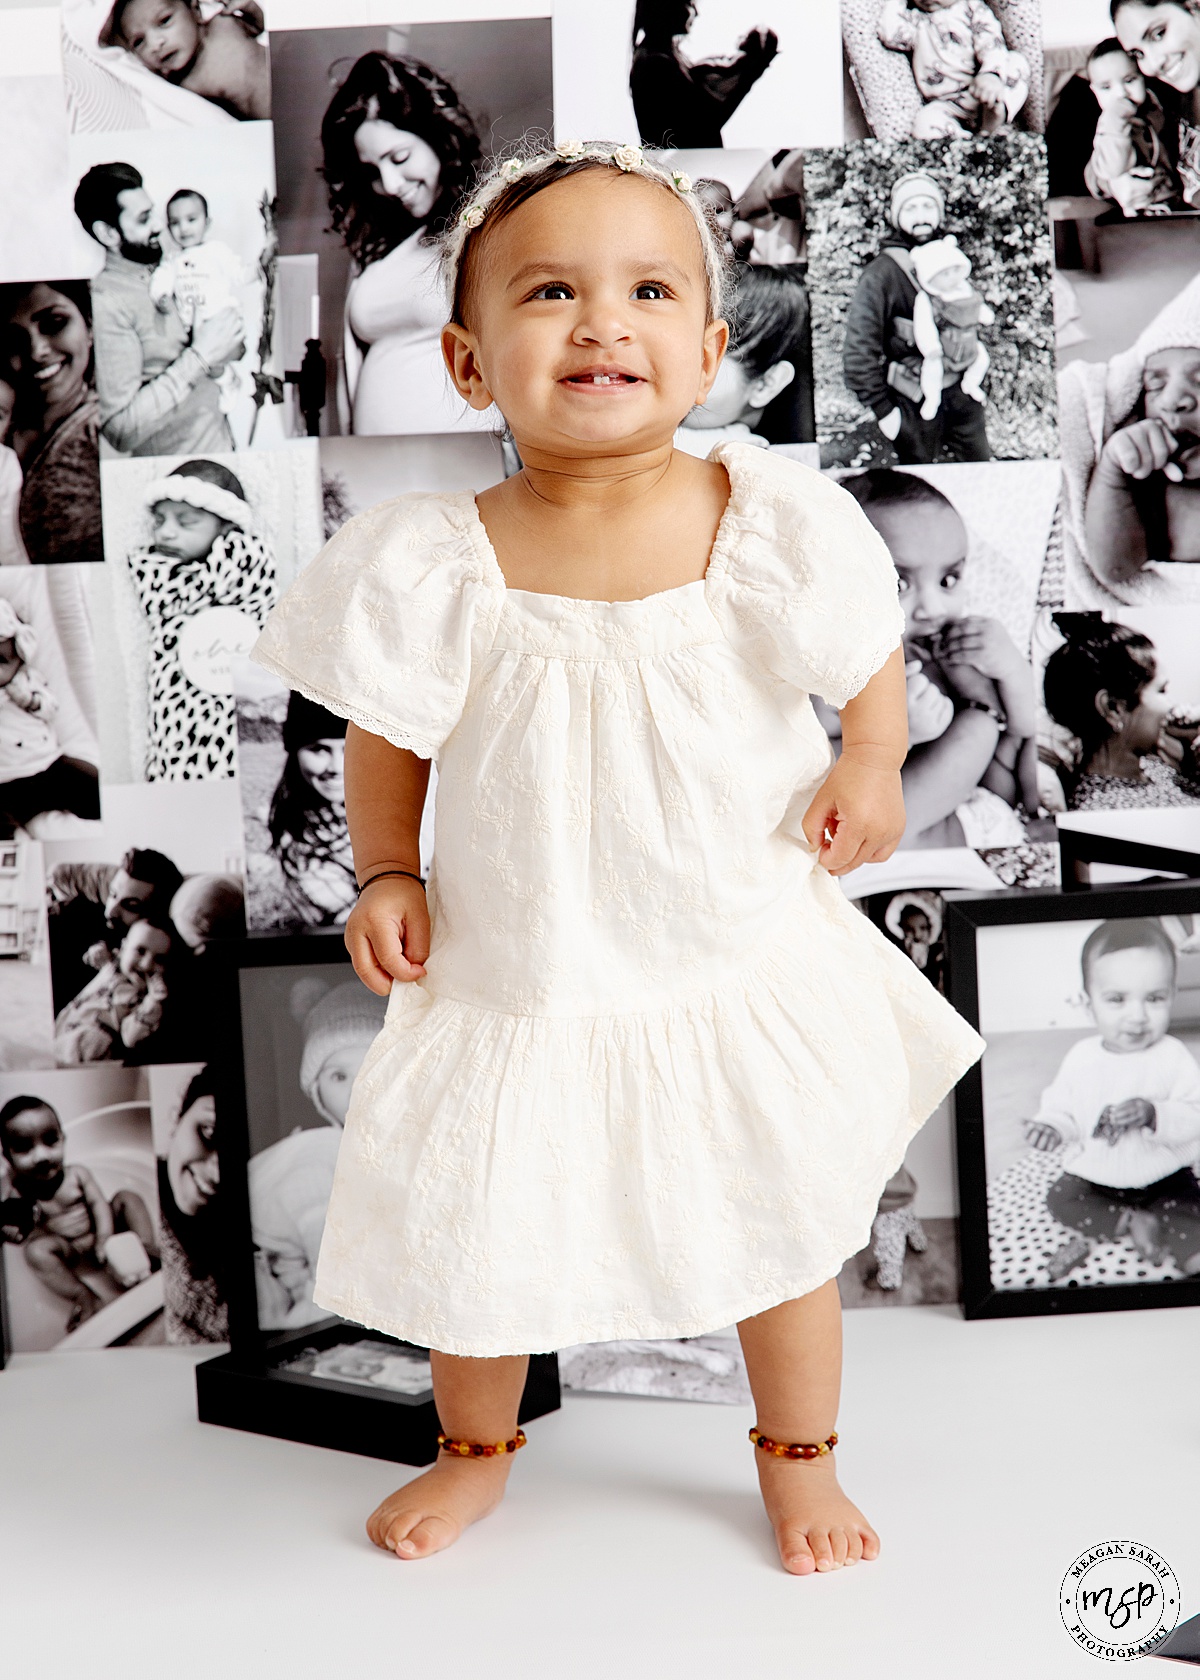 Photo wall,White backdrop,1st Birthday,Cake,First Birthday,Fun,Funny,Happy Birthday,Modern,Simple,Things to do with a toddler,Beautiful Photography,Children Photographer,High End,High Key,Meagan Sarah Photography,Photographer,Photography,Professional,Studio,Studio photographer,Floral headband,Girl,Leeds,Horsforth,West Yorkshire,